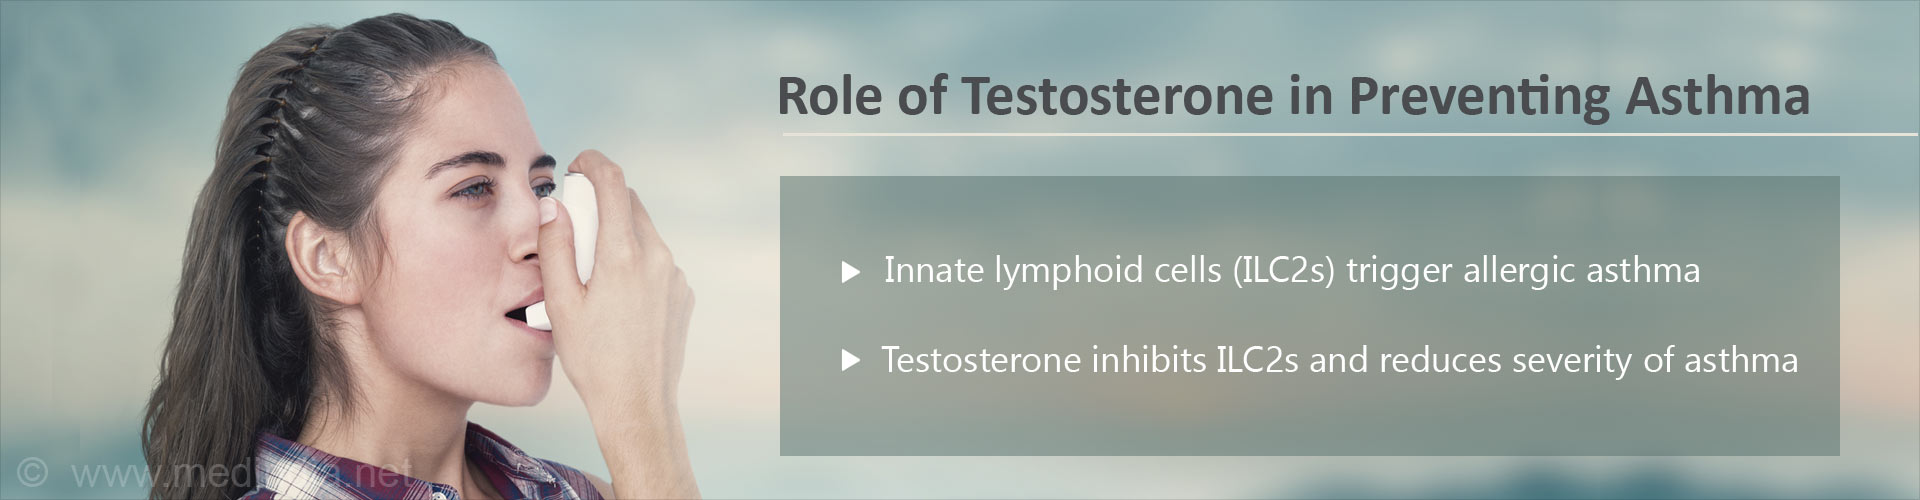 Role of Testosterone in Preventing Asthma
- Innate lymphoid cells (ILC2s) trigger allergic asthma
- Testosterone inhibits ILC2s and reduces severity of asthma